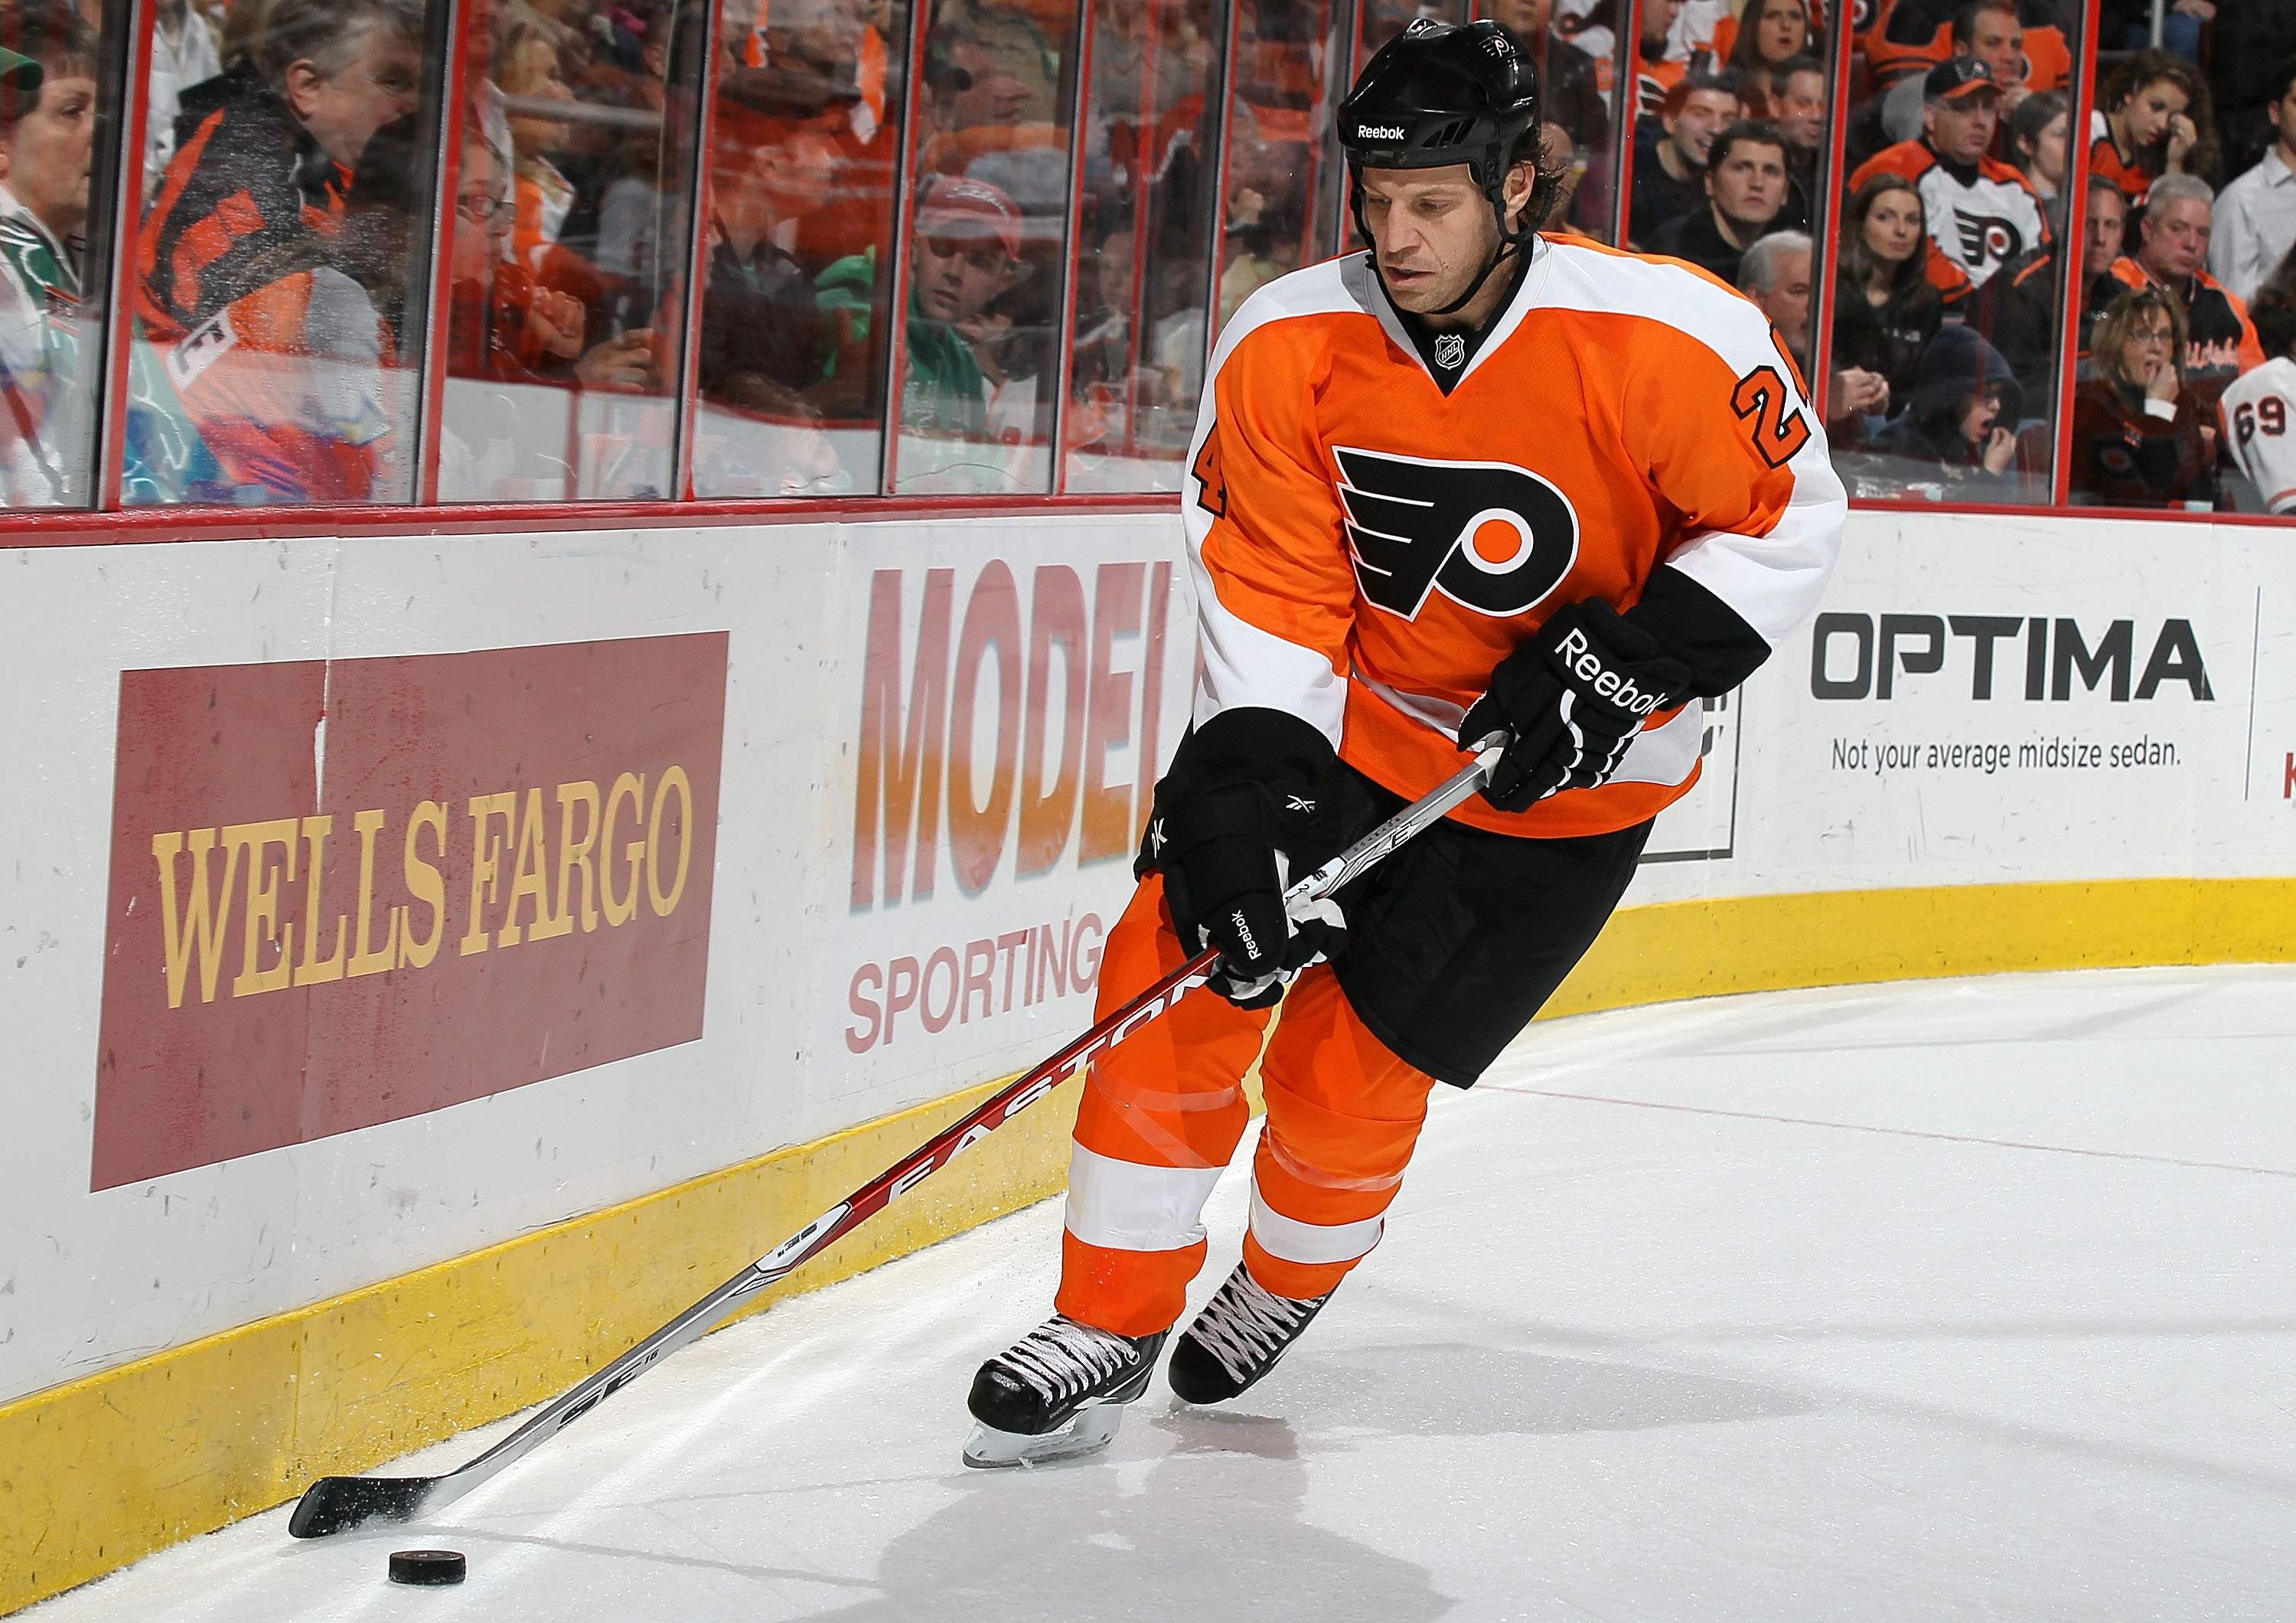 Chris Pronger: How the Philadelphia Flyers Can Replace His